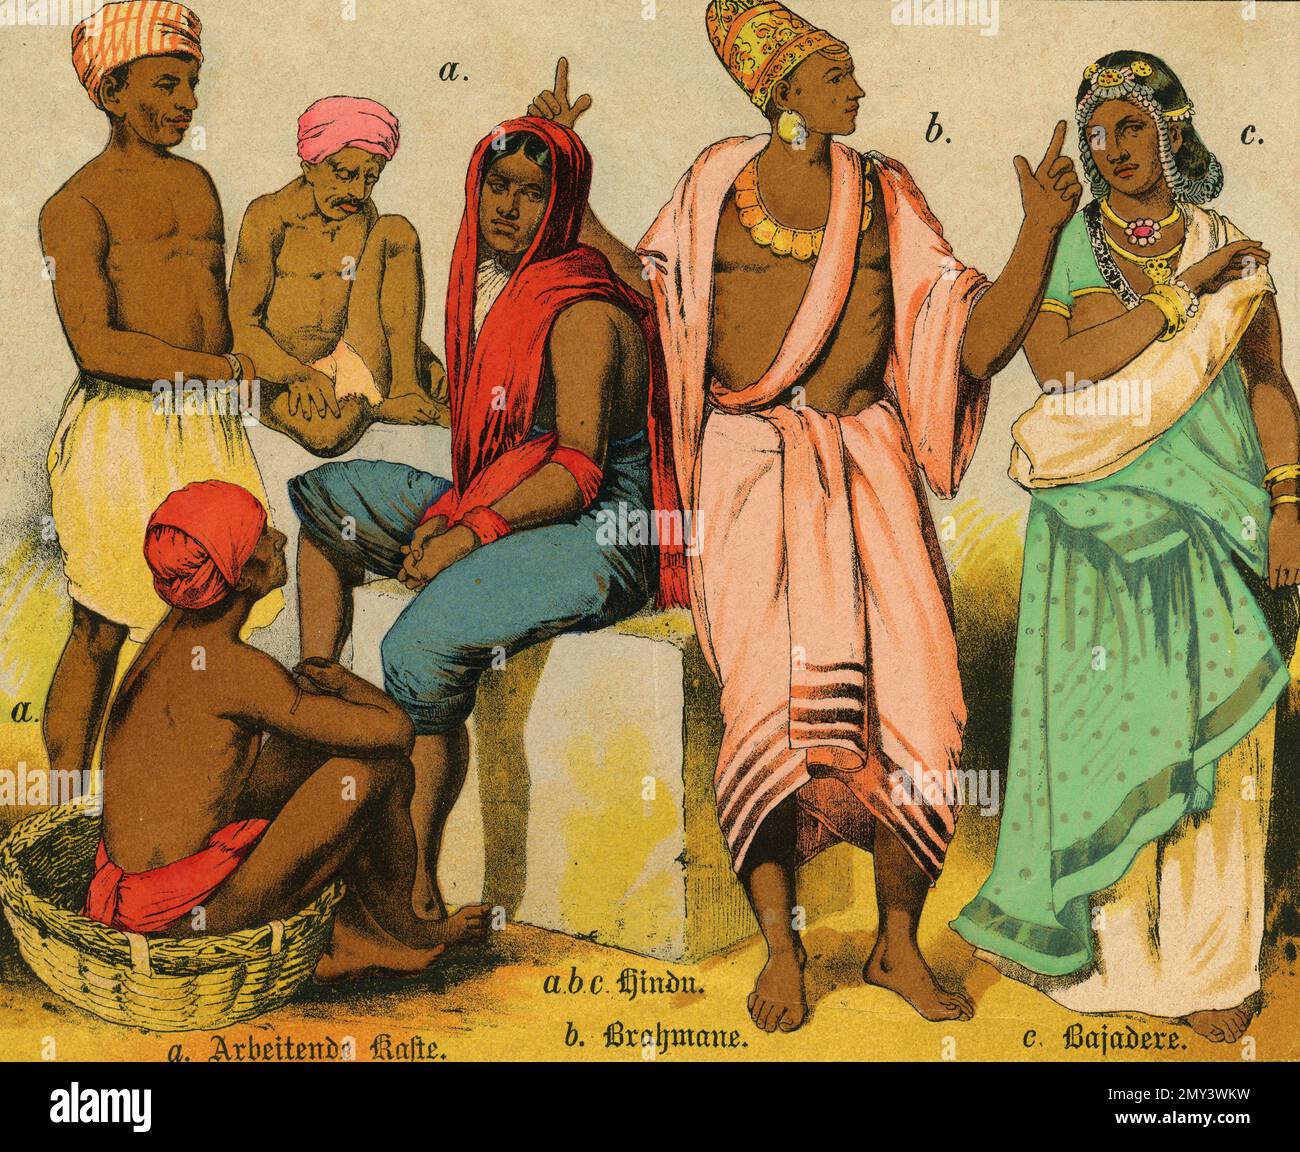 Populations of the world: India working caste, Hindu, Brahmin, Bajadere, color illustration, Germany 1800s Stock Photo